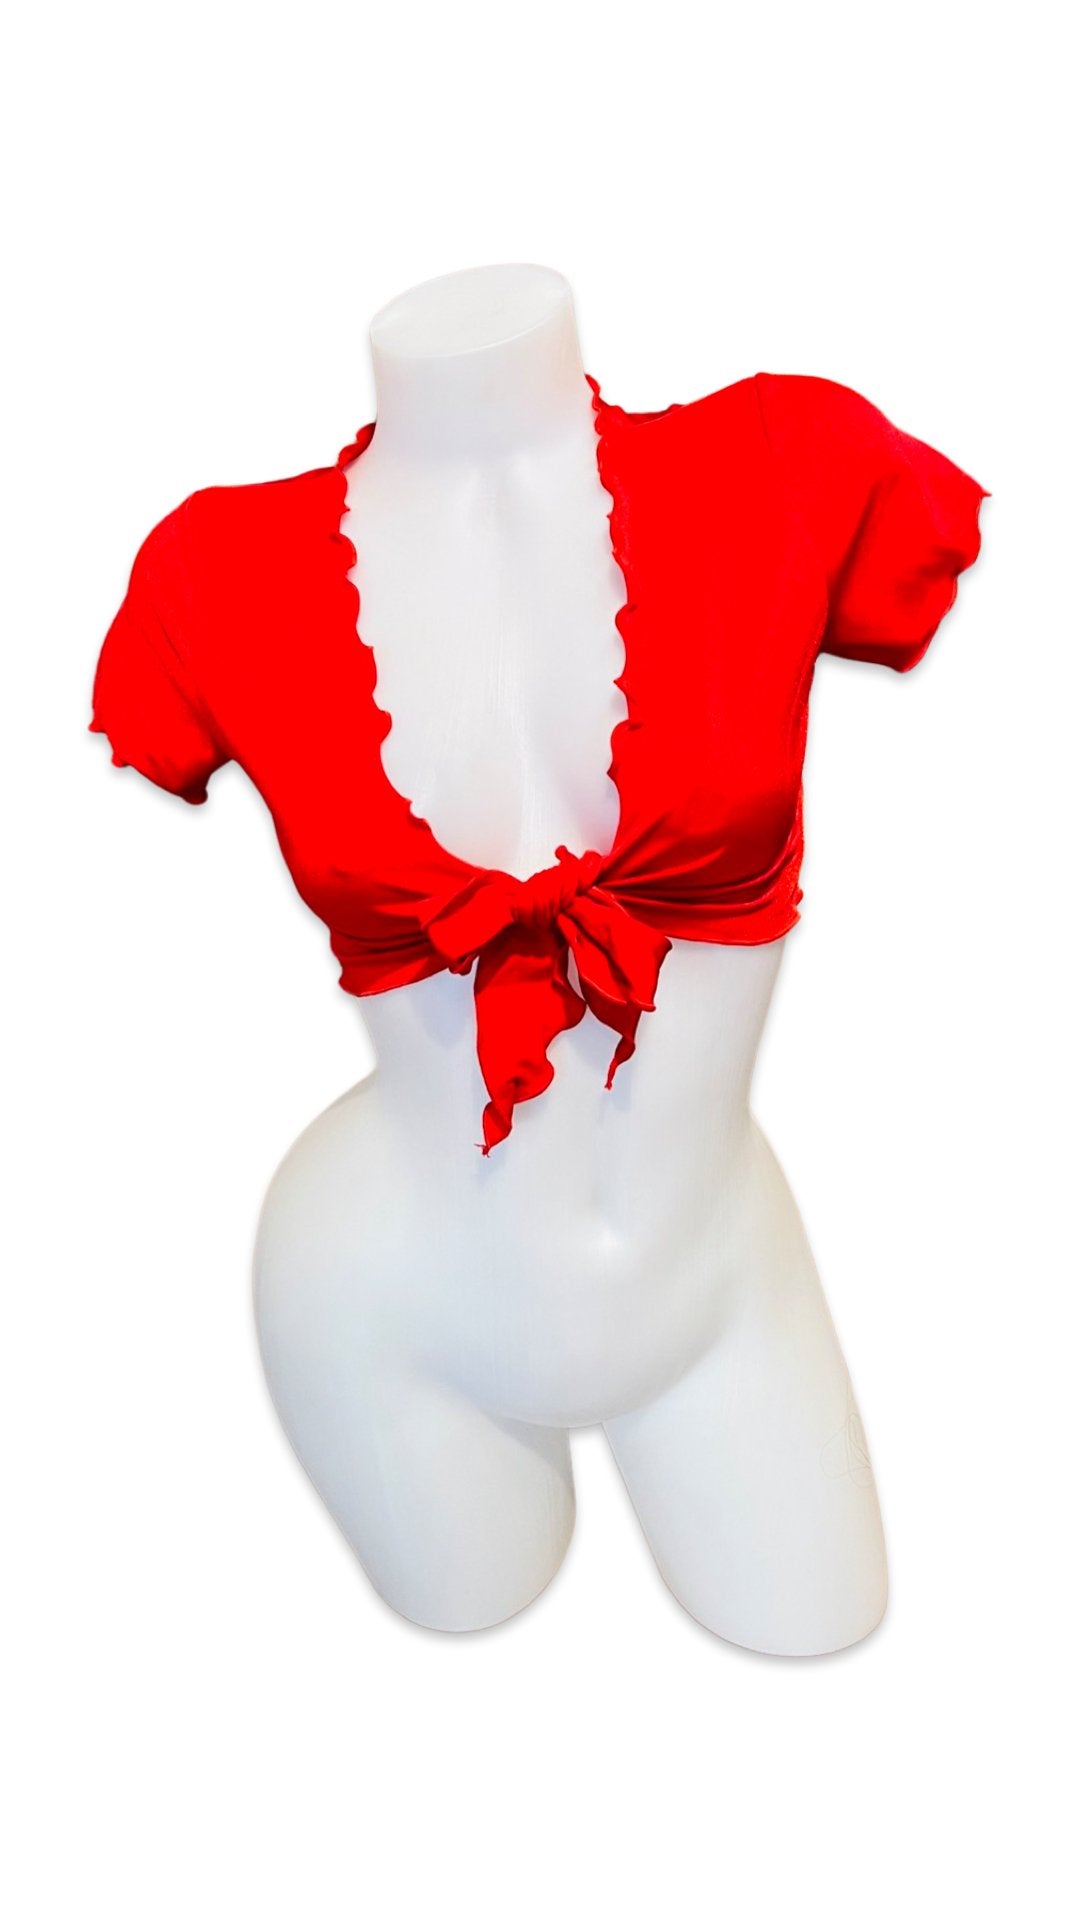 Ruffle School Girl Top Red - Model Express VancouverClothing